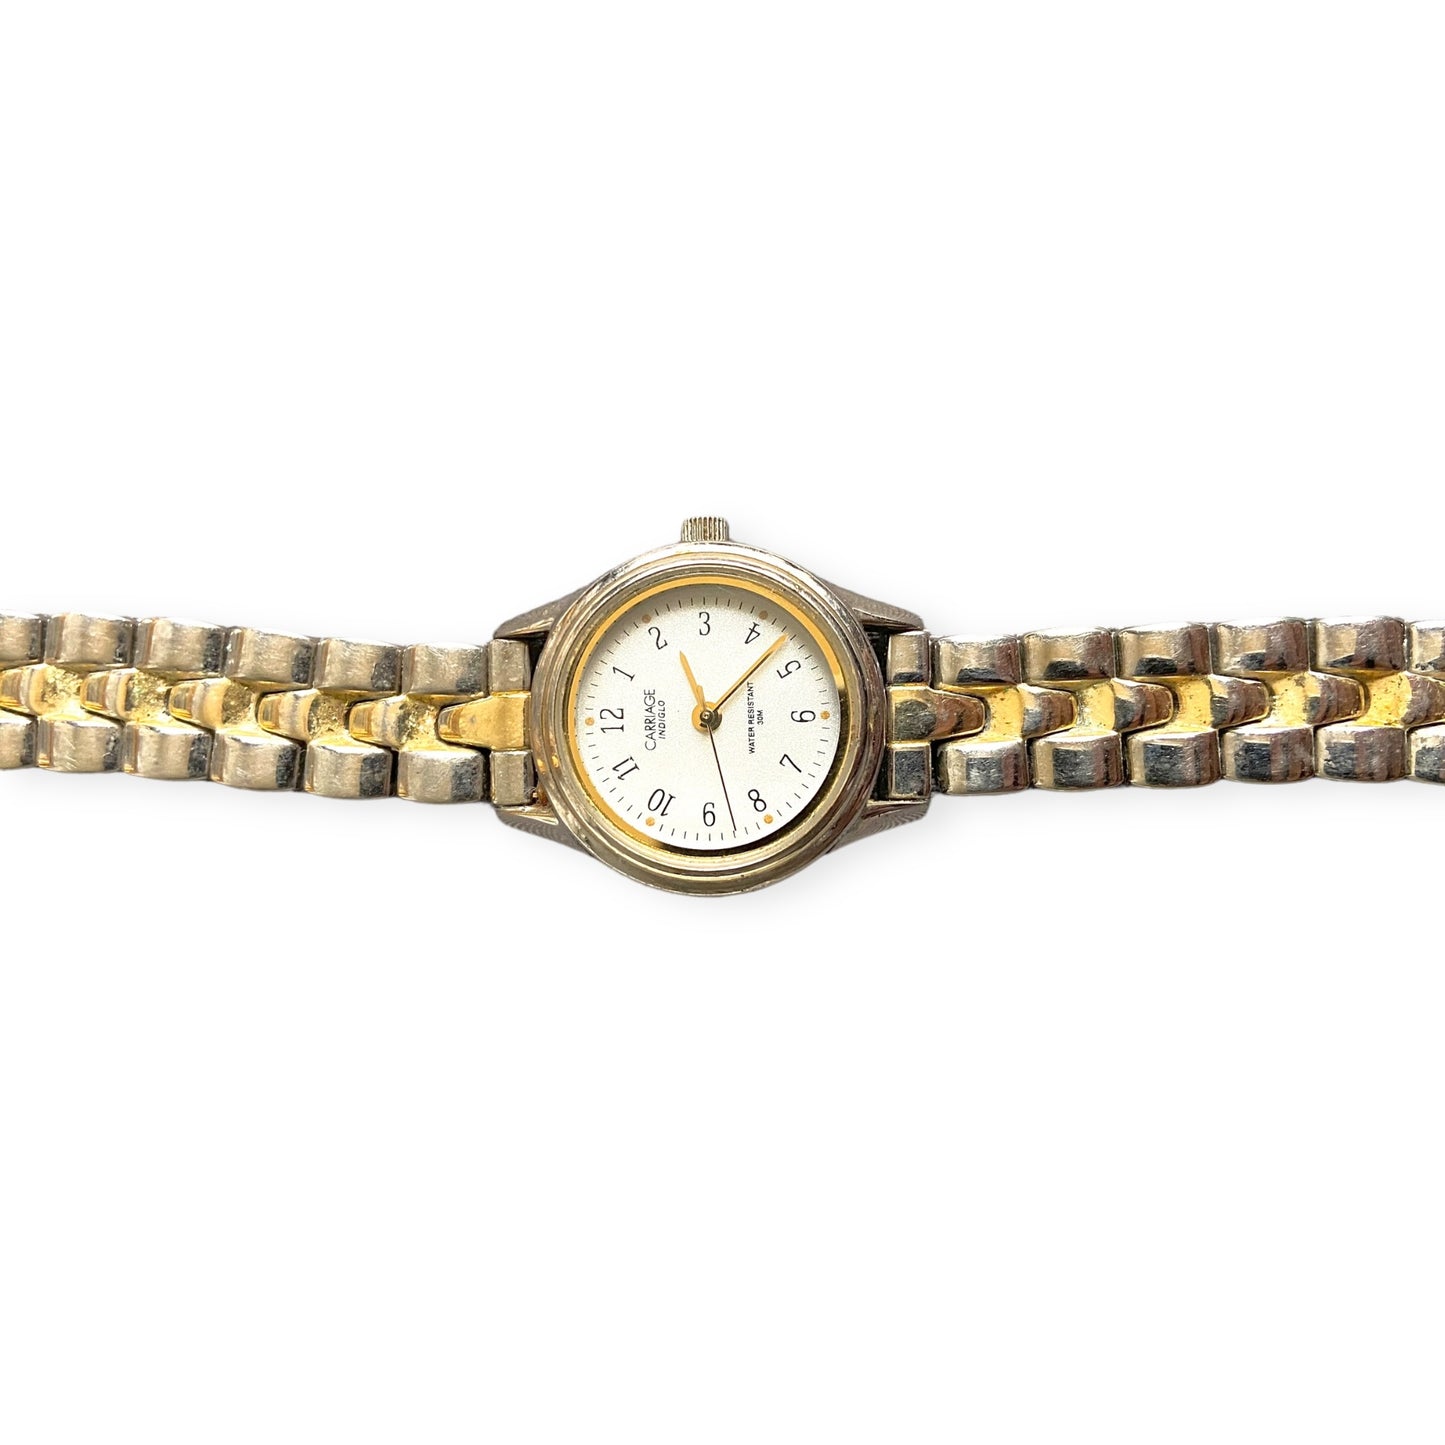 One-of-one | Carriage Indiglo ( lights up ) water resistant timex gold + silver watch